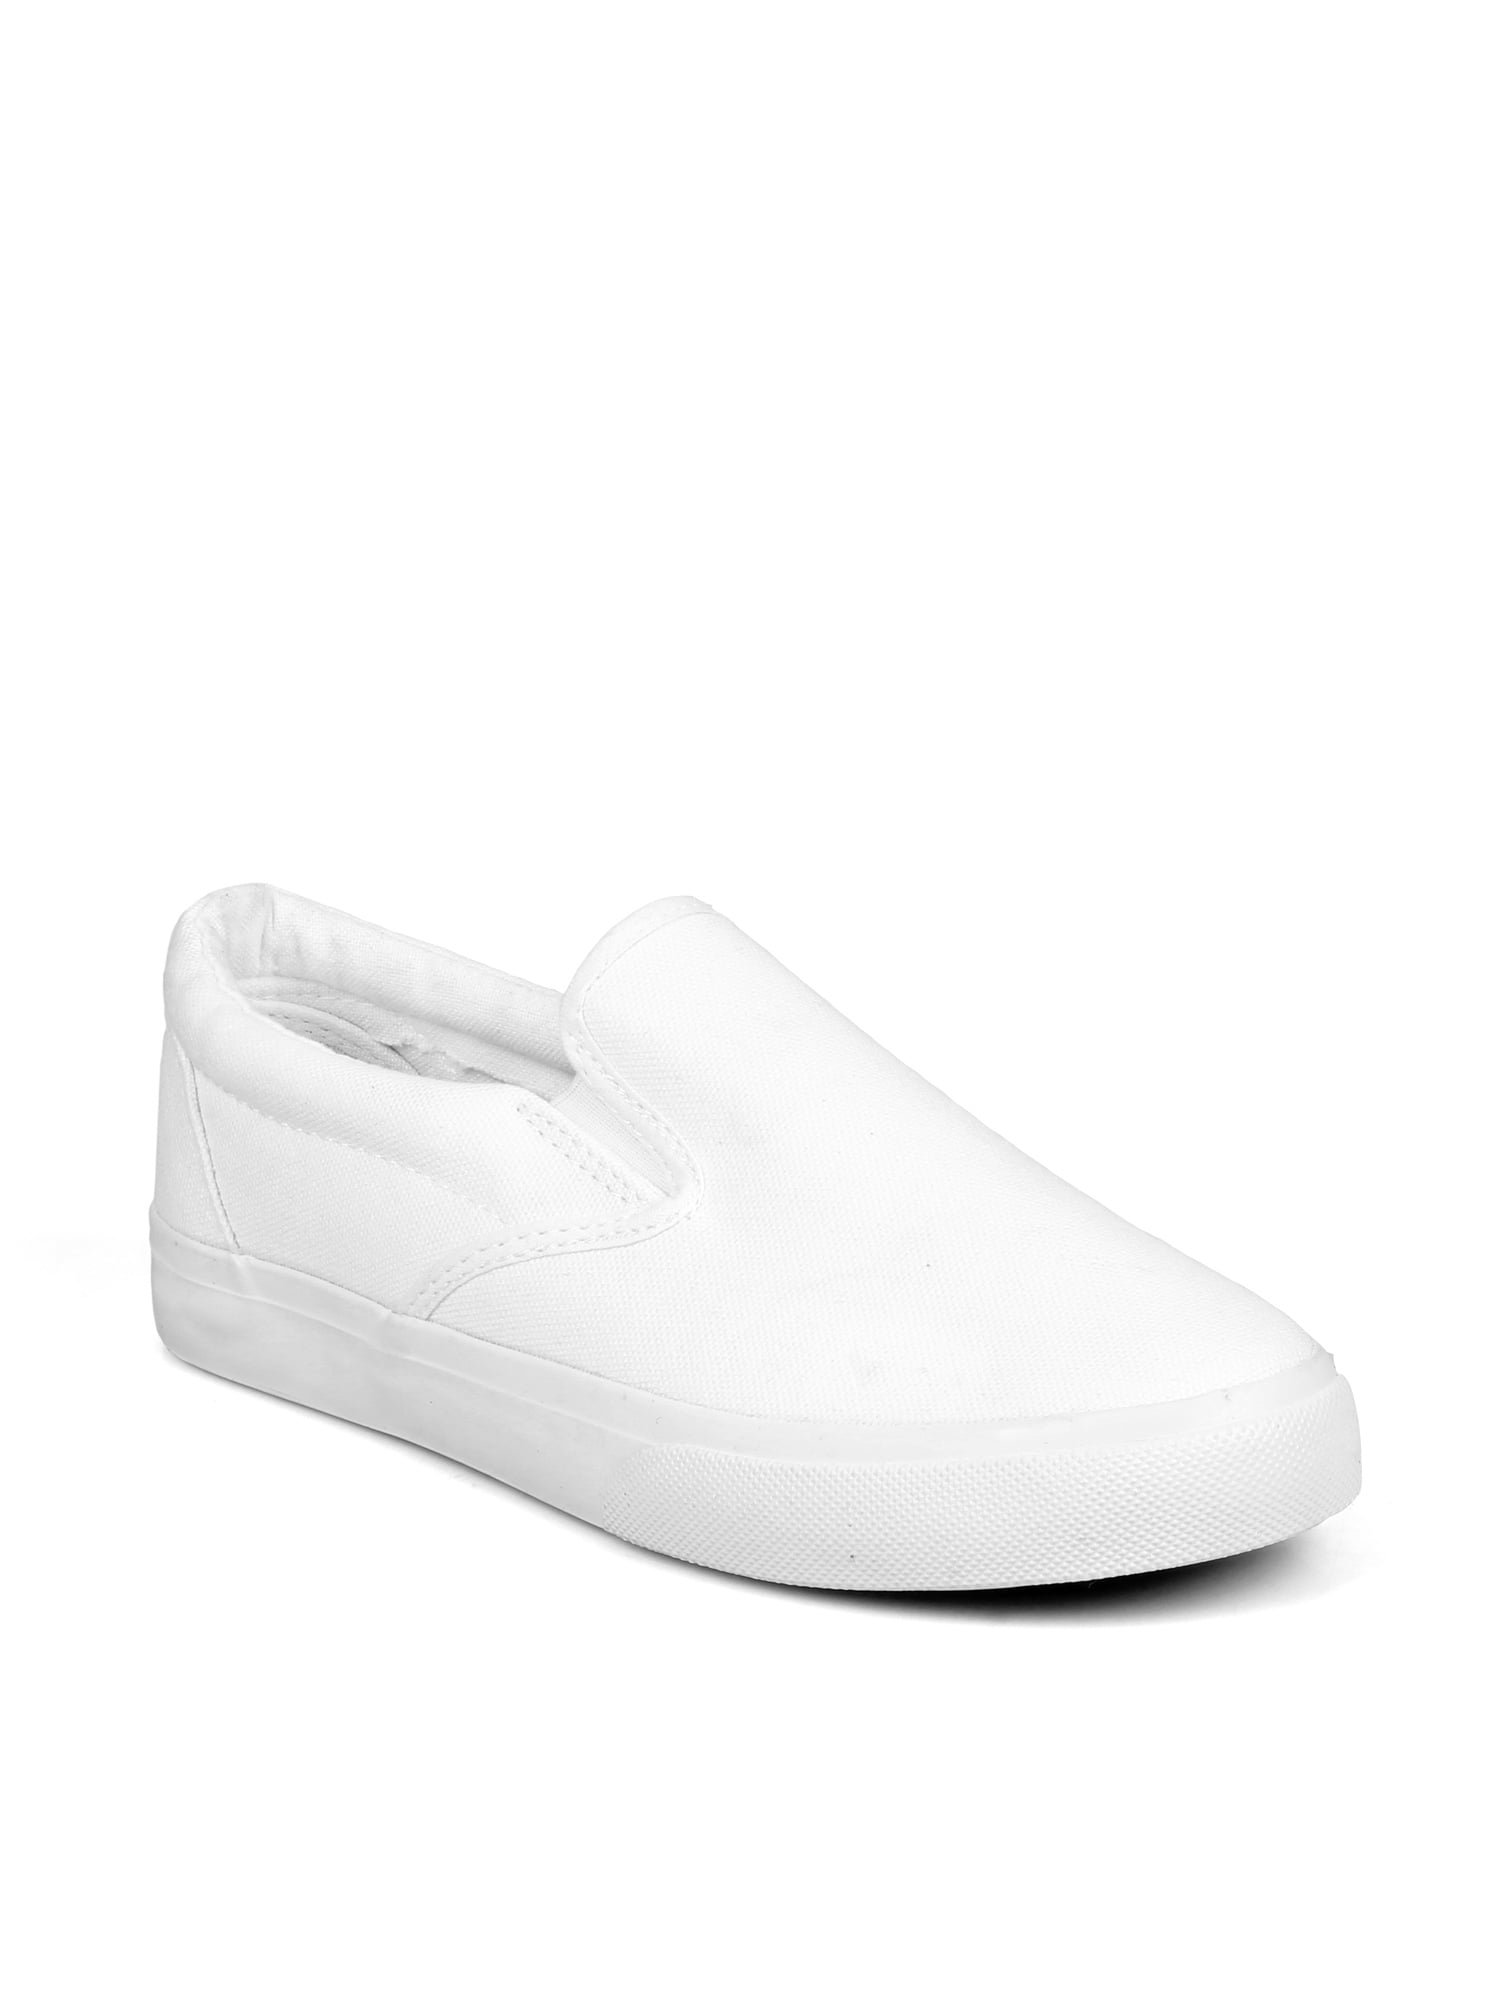 White Canvas Boots | lupon.gov.ph